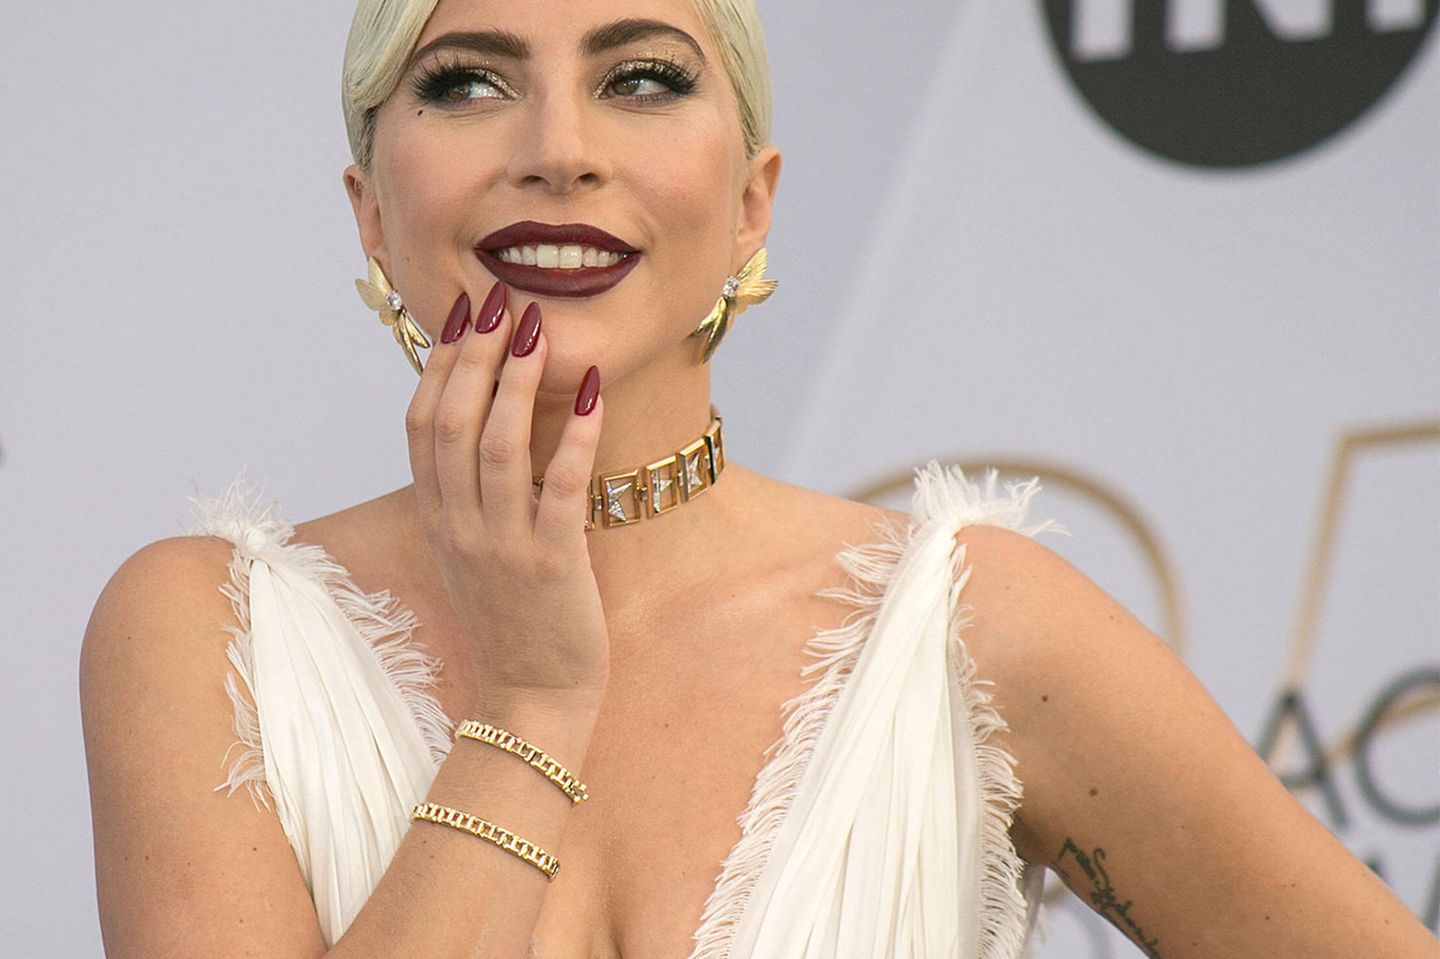 February 26, 2021, Los Angeles, California, USA: Lady Gaga offers $500,000 for return of dogs after thief steals them and shoot…